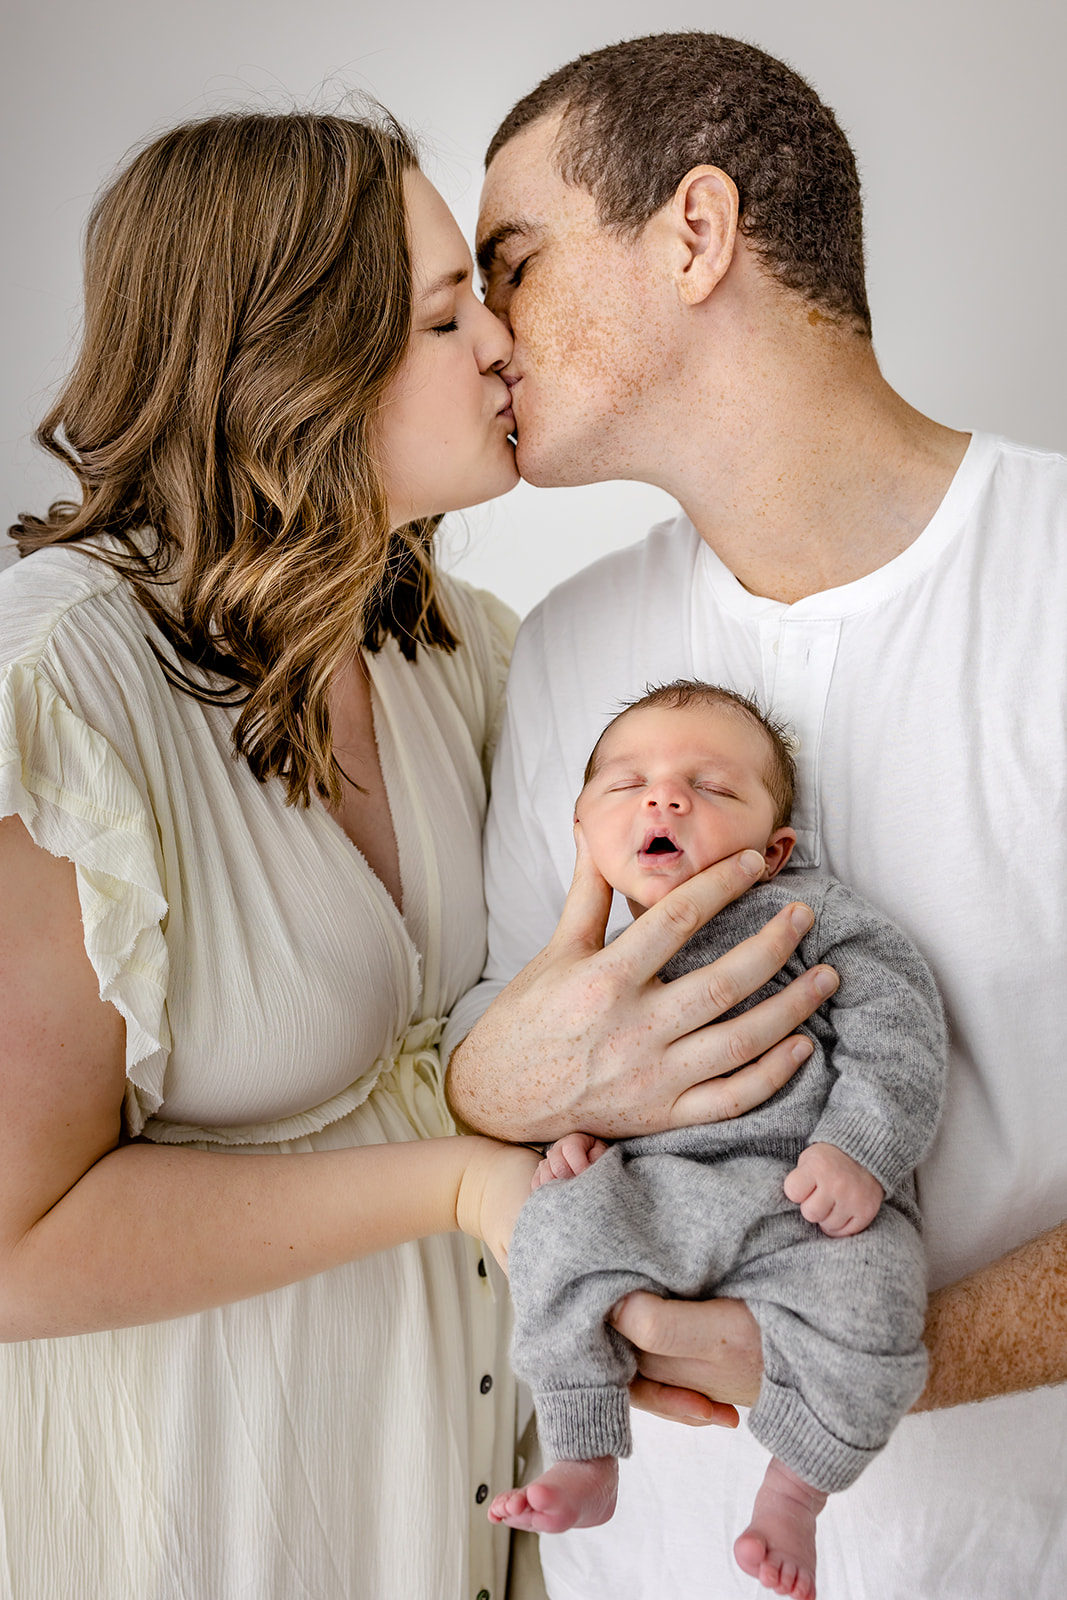 A mom and dad kiss while holding their sleeping newborn baby in a studio before finding a Chippewa Falls Daycare